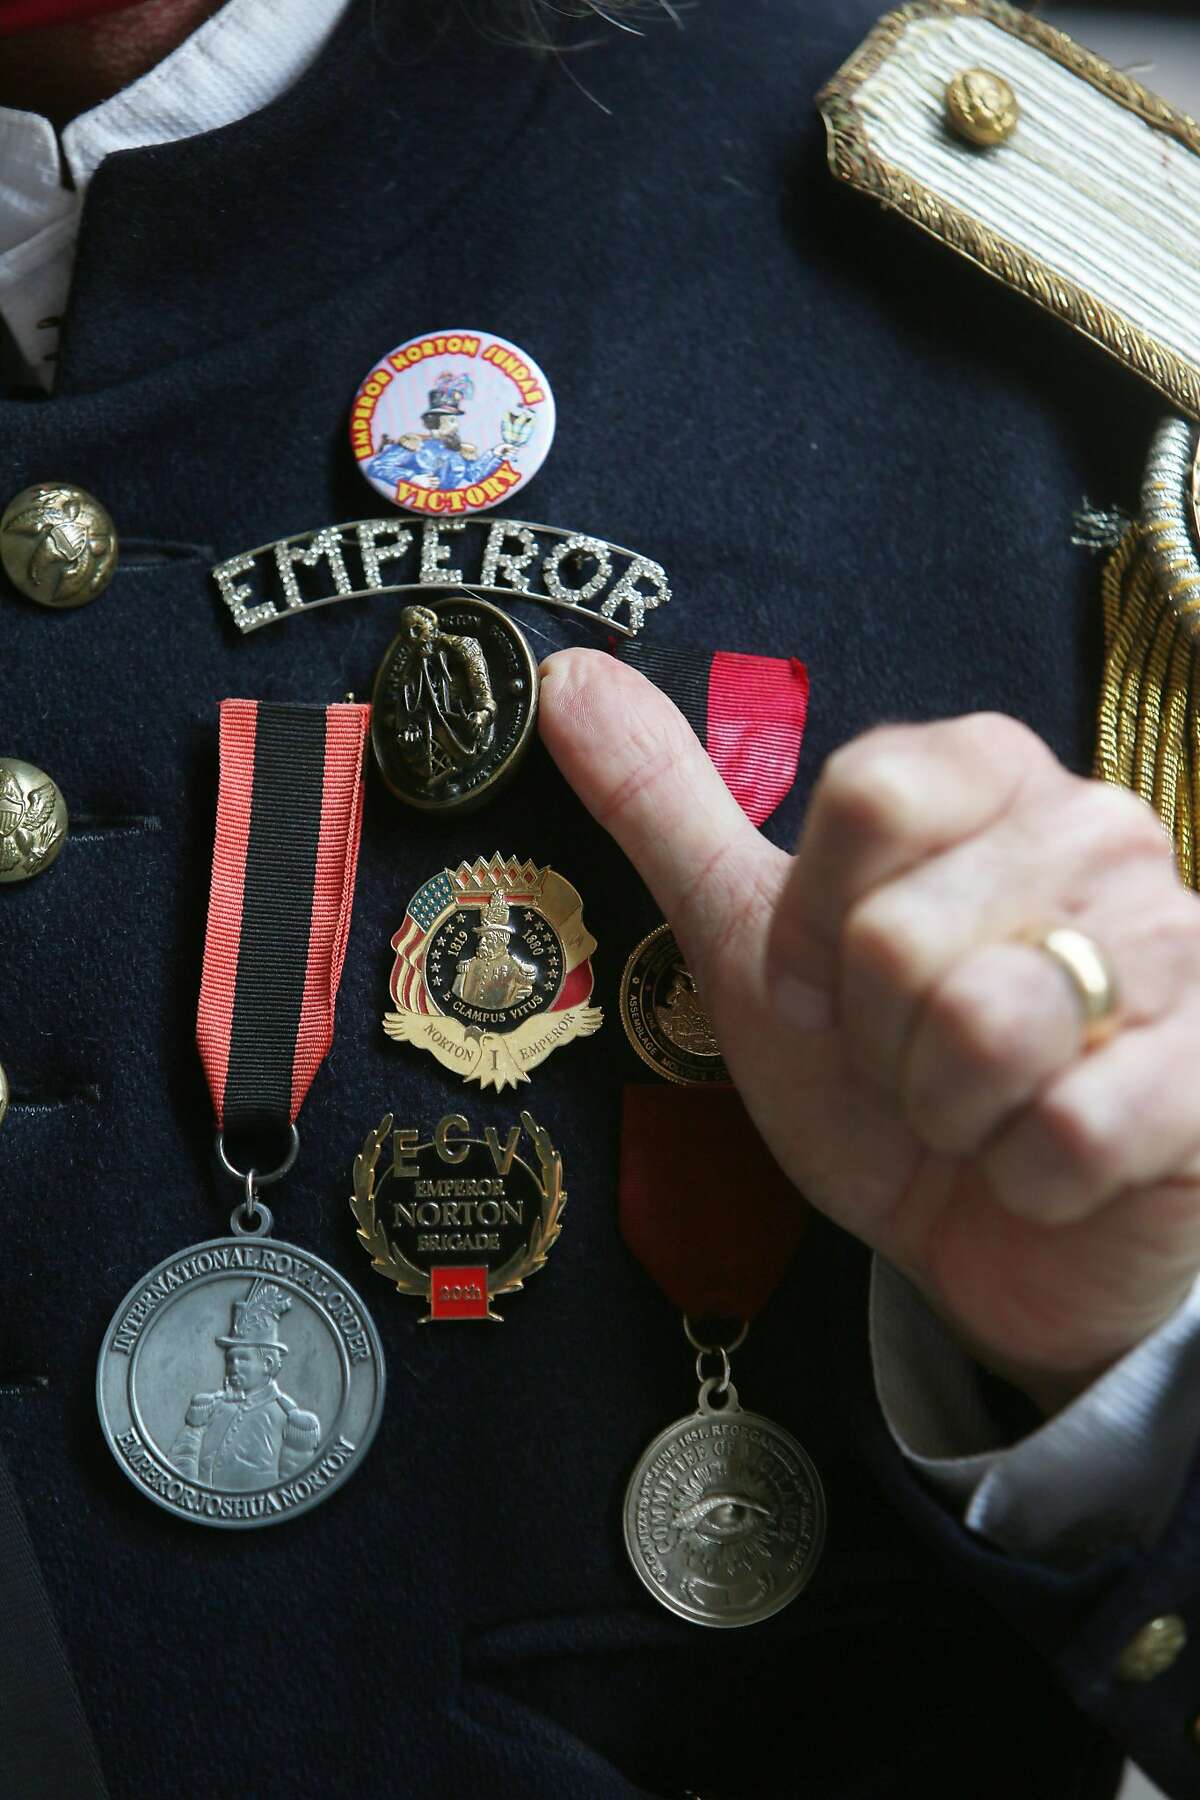 Joseph Amster as Emperor Norton wears a pin that says Emperor along with medals on his jacket on Wednesday, September 30, 2020 in San Francisco, Calif.